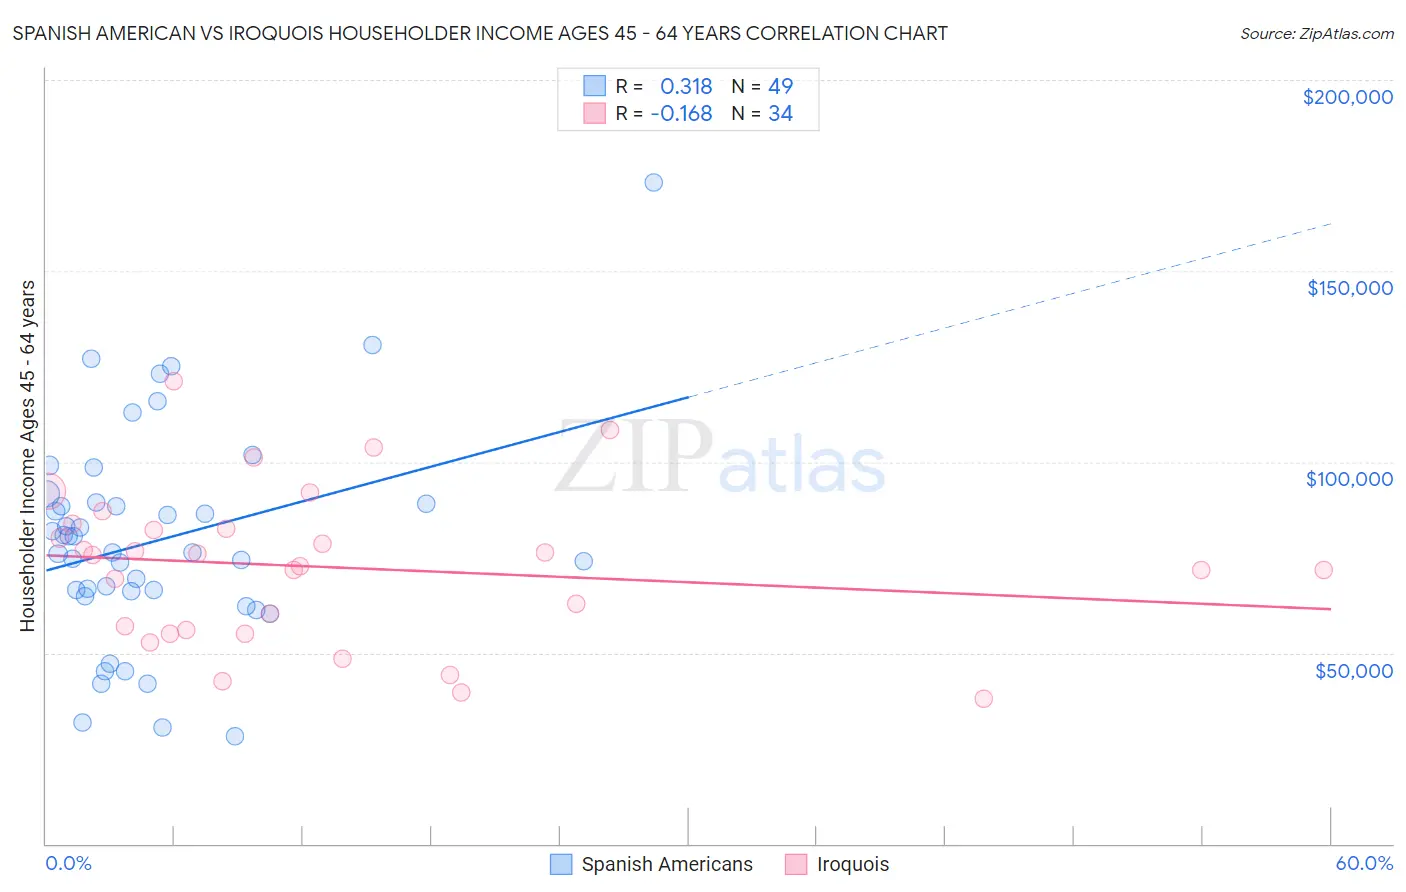 Spanish American vs Iroquois Householder Income Ages 45 - 64 years